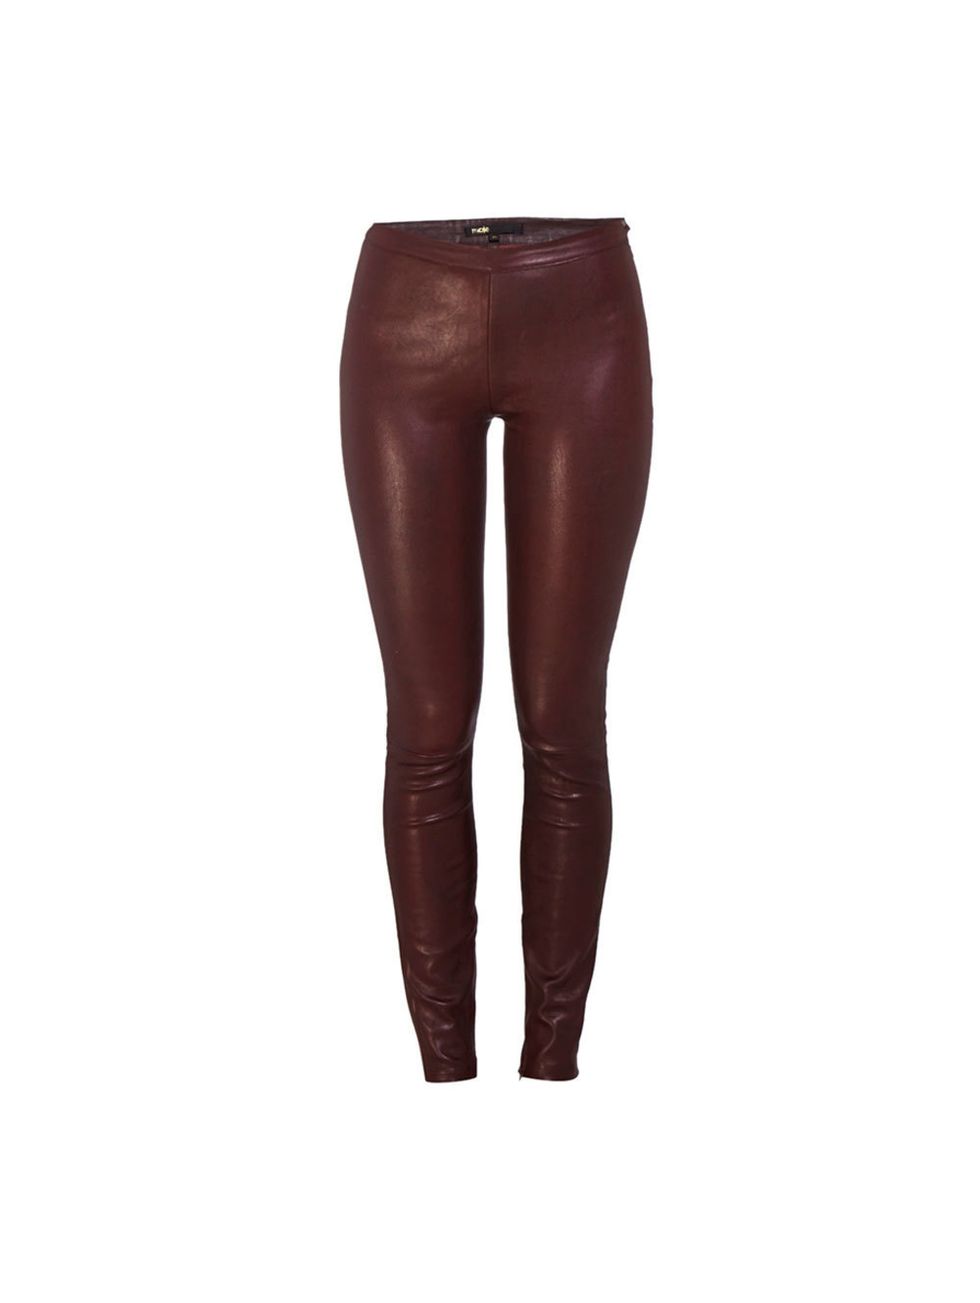 Brown, Waist, Black, Liver, Maroon, Leather, Tights, Pocket, Latex, Latex clothing, 